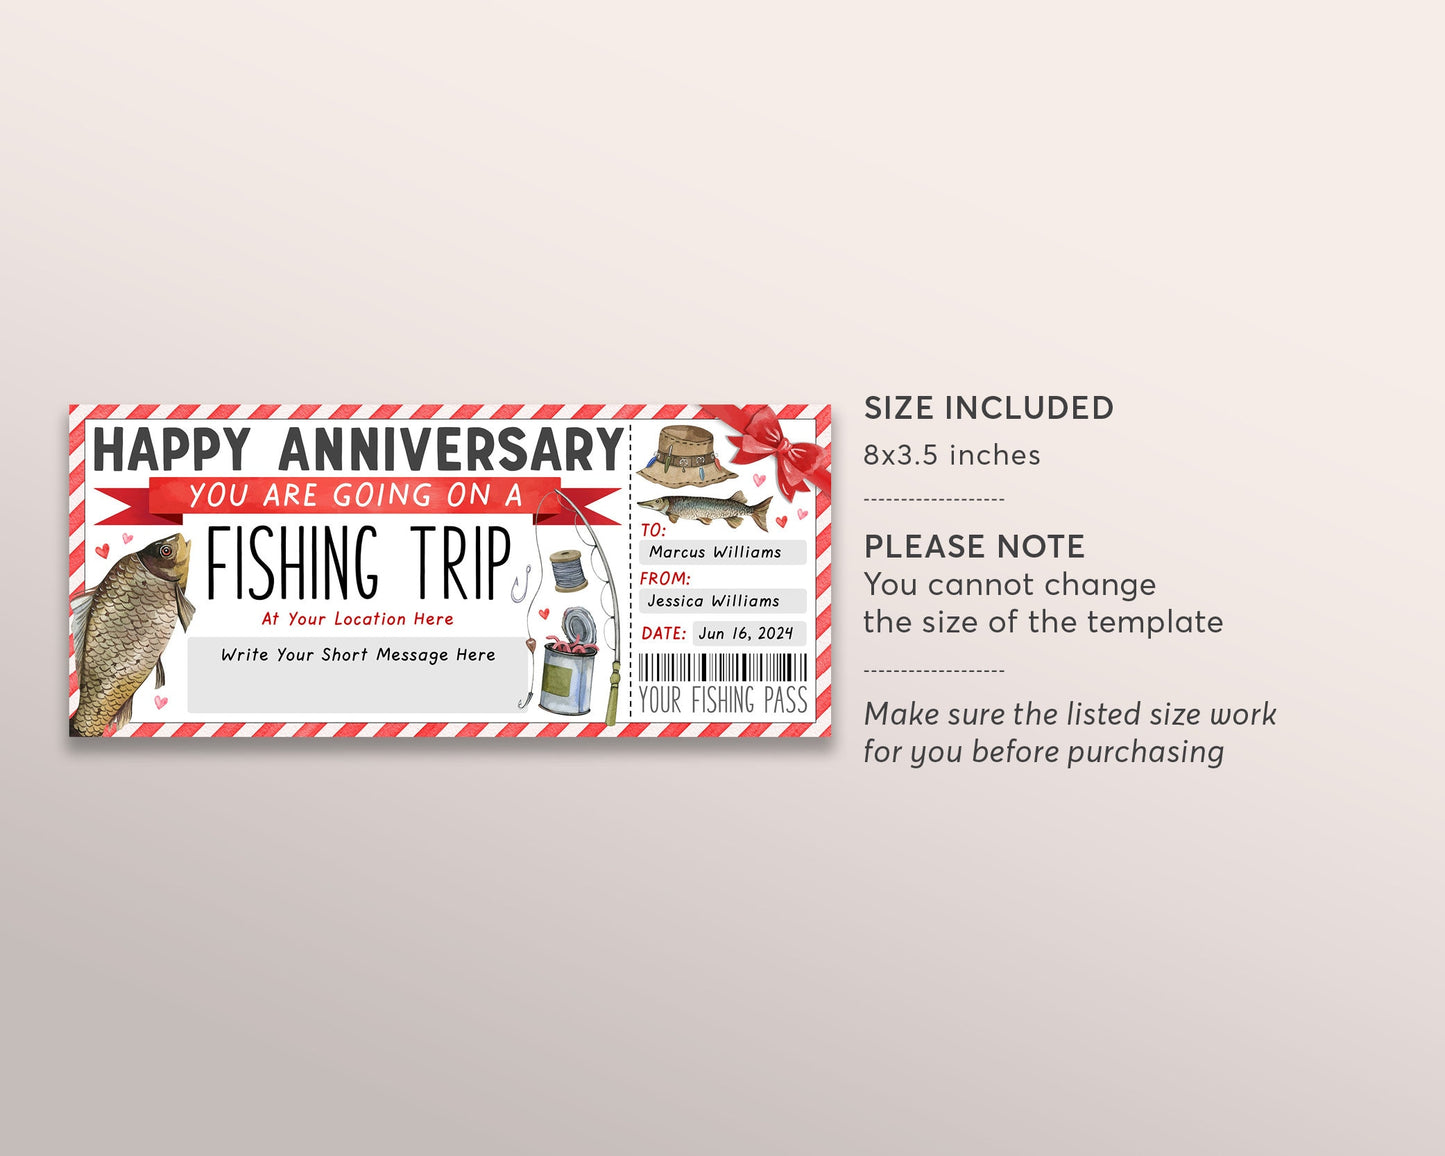 Fishing Trip Ticket Editable Template, Wedding Anniversary Fishing Trip Reveal Gift Certificate For Husband, Fishing Day Trip Voucher Coupon